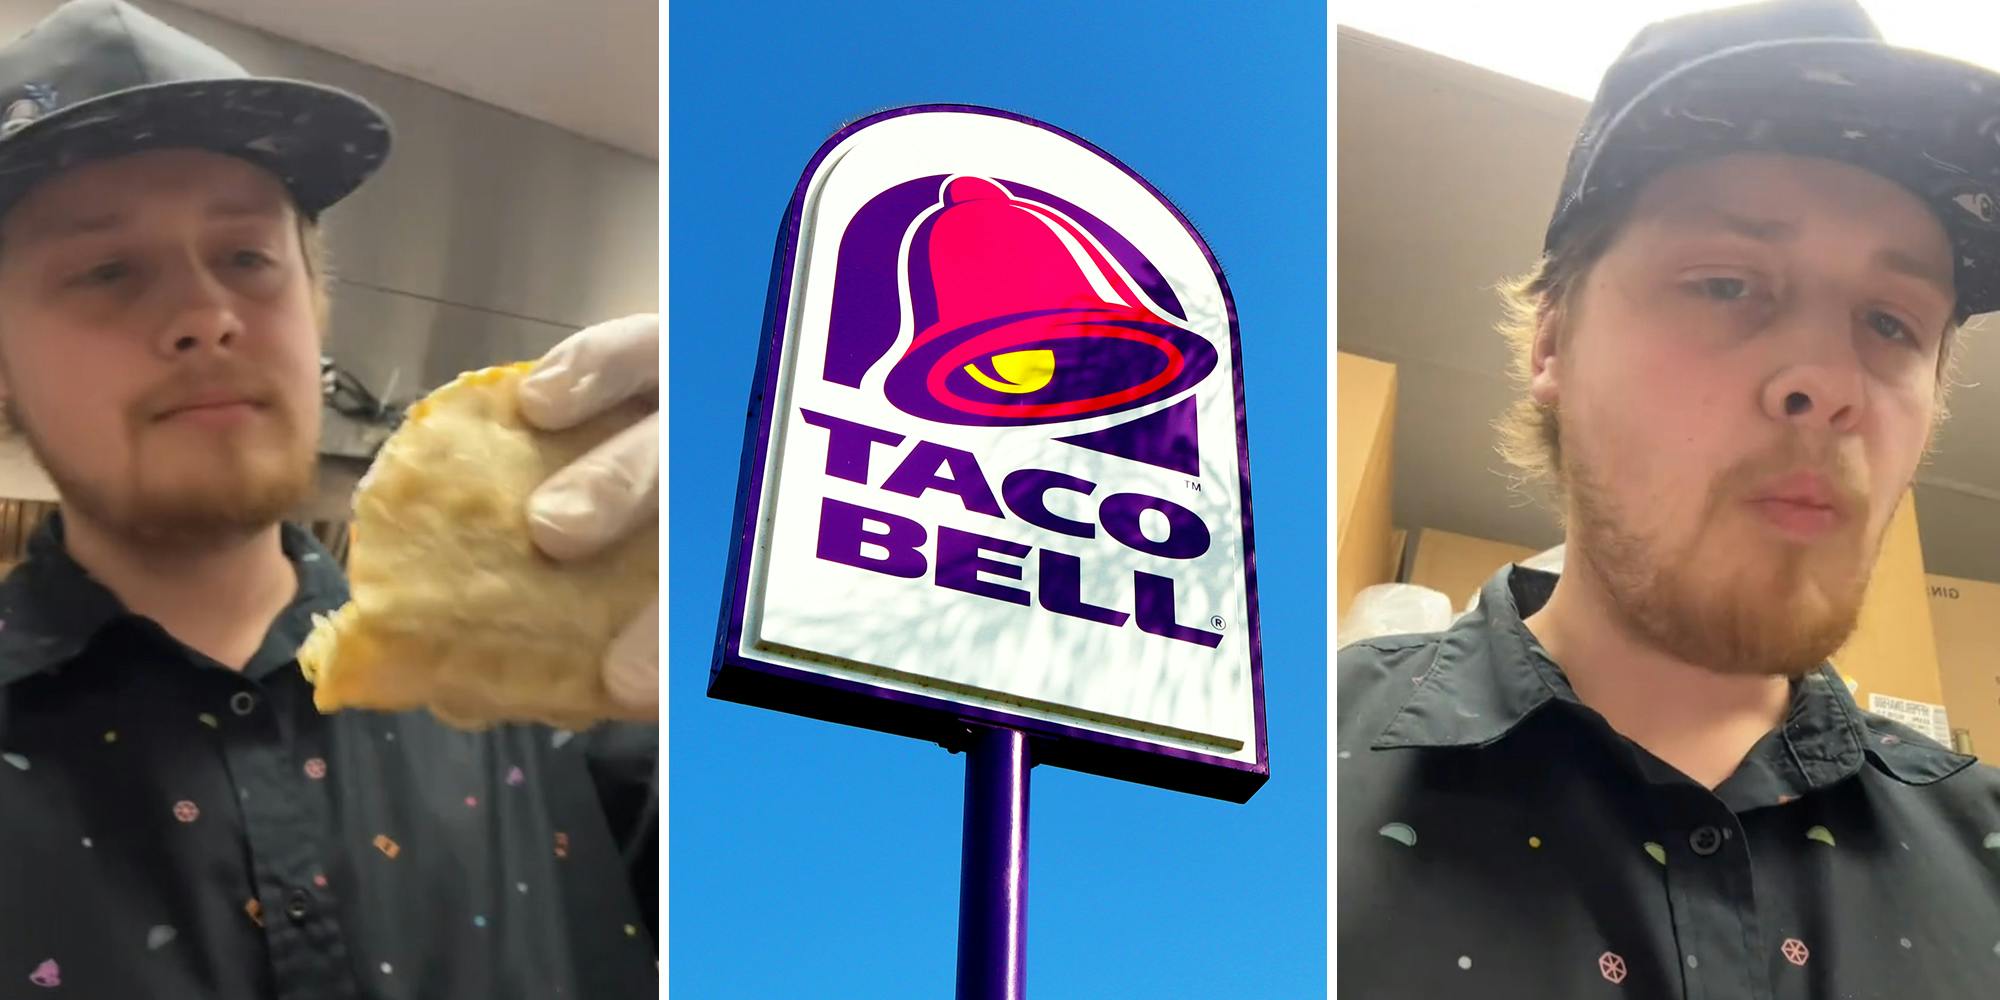 Taco Bell worker says he fell for scam that let customer get 2 orders for the cost of 1